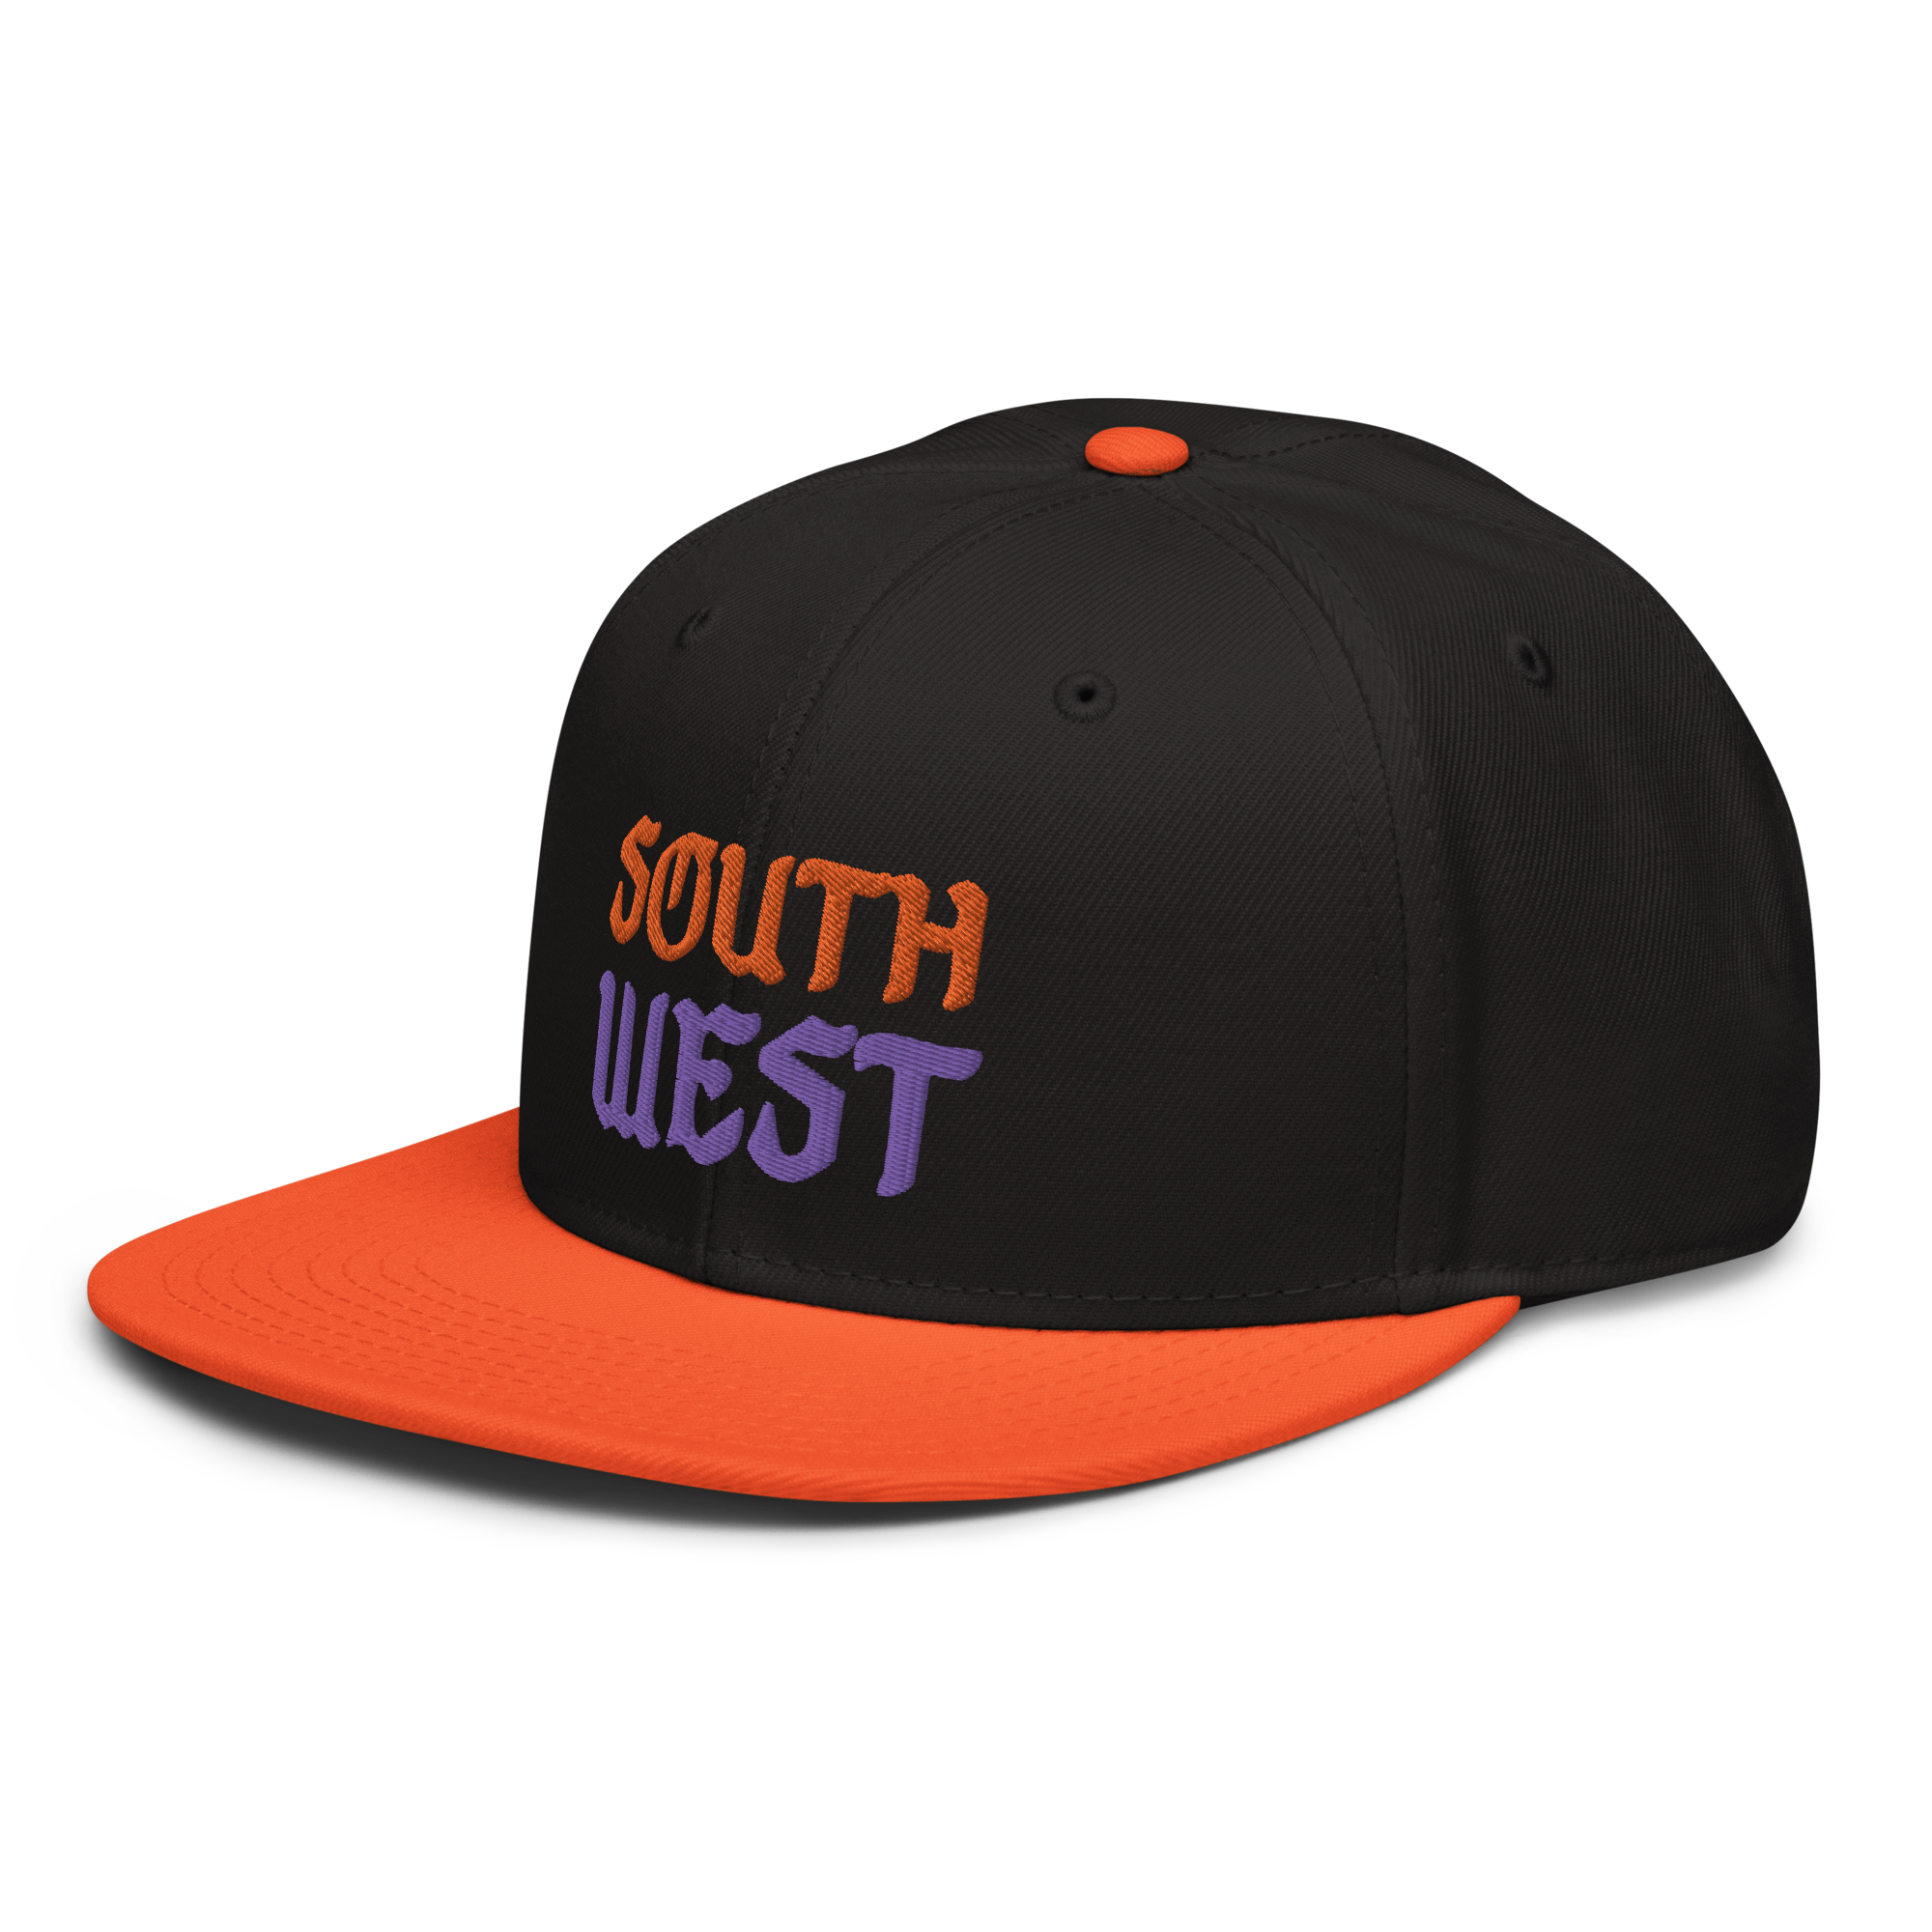 Organ – SouthWest Snapback Mountain Outfitters Hat